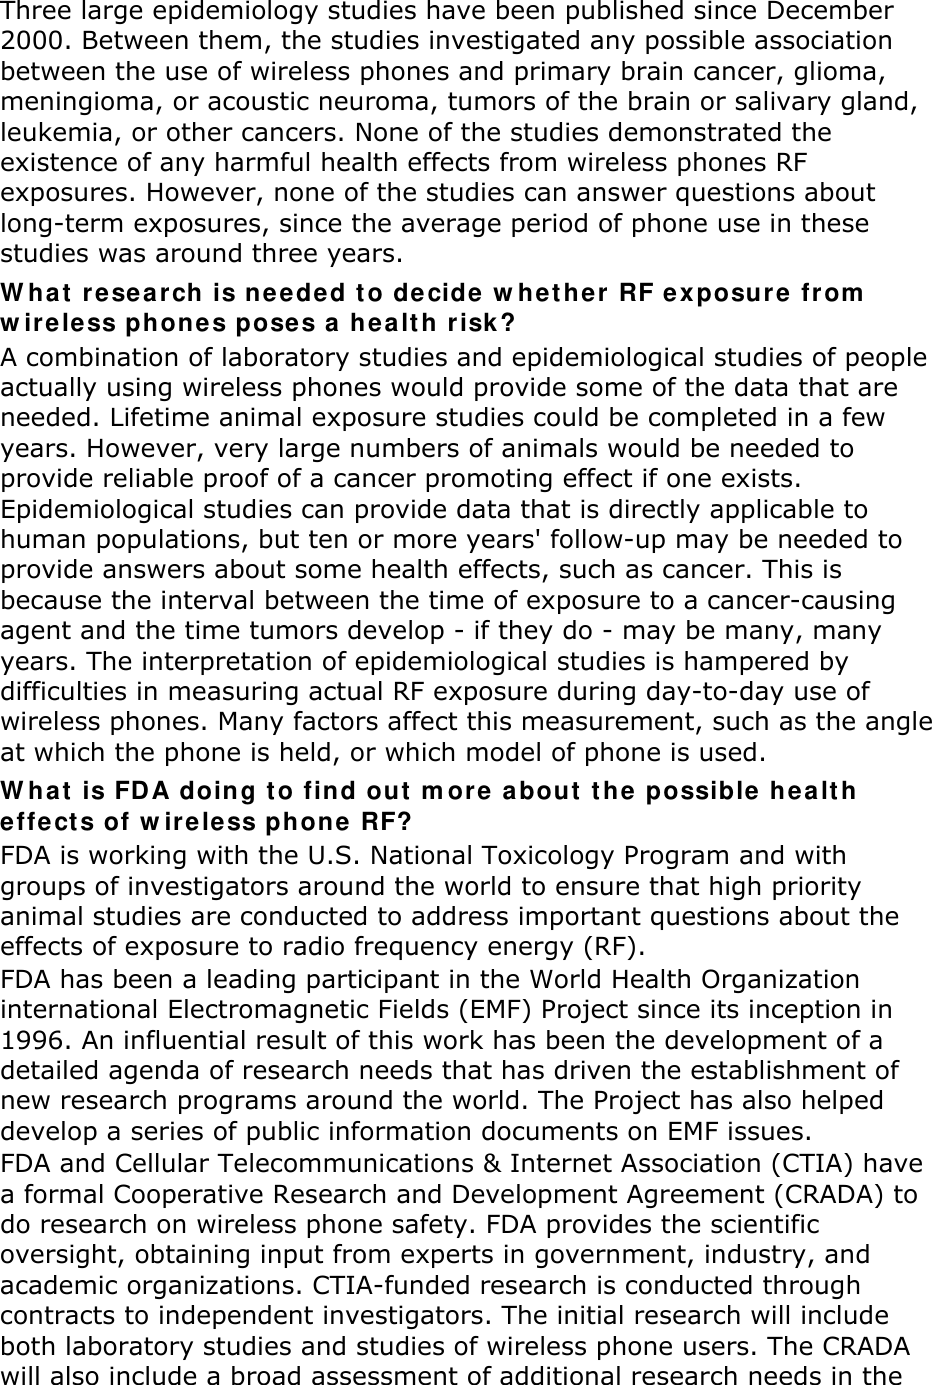 Three large epidemiology studies have been published since December 2000. Between them, the studies investigated any possible association between the use of wireless phones and primary brain cancer, glioma, meningioma, or acoustic neuroma, tumors of the brain or salivary gland, leukemia, or other cancers. None of the studies demonstrated the existence of any harmful health effects from wireless phones RF exposures. However, none of the studies can answer questions about long-term exposures, since the average period of phone use in these studies was around three years. W hat re search  is neede d t o de cide w hether  RF e xposure fr om  w ireless phones poses a hea lt h r isk ? A combination of laboratory studies and epidemiological studies of people actually using wireless phones would provide some of the data that are needed. Lifetime animal exposure studies could be completed in a few years. However, very large numbers of animals would be needed to provide reliable proof of a cancer promoting effect if one exists. Epidemiological studies can provide data that is directly applicable to human populations, but ten or more years&apos; follow-up may be needed to provide answers about some health effects, such as cancer. This is because the interval between the time of exposure to a cancer-causing agent and the time tumors develop - if they do - may be many, many years. The interpretation of epidemiological studies is hampered by difficulties in measuring actual RF exposure during day-to-day use of wireless phones. Many factors affect this measurement, such as the angle at which the phone is held, or which model of phone is used. W hat is FDA doing t o find out  m ore  about  t he  possible healt h effect s of w ire less phone  RF? FDA is working with the U.S. National Toxicology Program and with groups of investigators around the world to ensure that high priority animal studies are conducted to address important questions about the effects of exposure to radio frequency energy (RF). FDA has been a leading participant in the World Health Organization international Electromagnetic Fields (EMF) Project since its inception in 1996. An influential result of this work has been the development of a detailed agenda of research needs that has driven the establishment of new research programs around the world. The Project has also helped develop a series of public information documents on EMF issues. FDA and Cellular Telecommunications &amp; Internet Association (CTIA) have a formal Cooperative Research and Development Agreement (CRADA) to do research on wireless phone safety. FDA provides the scientific oversight, obtaining input from experts in government, industry, and academic organizations. CTIA-funded research is conducted through contracts to independent investigators. The initial research will include both laboratory studies and studies of wireless phone users. The CRADA will also include a broad assessment of additional research needs in the 